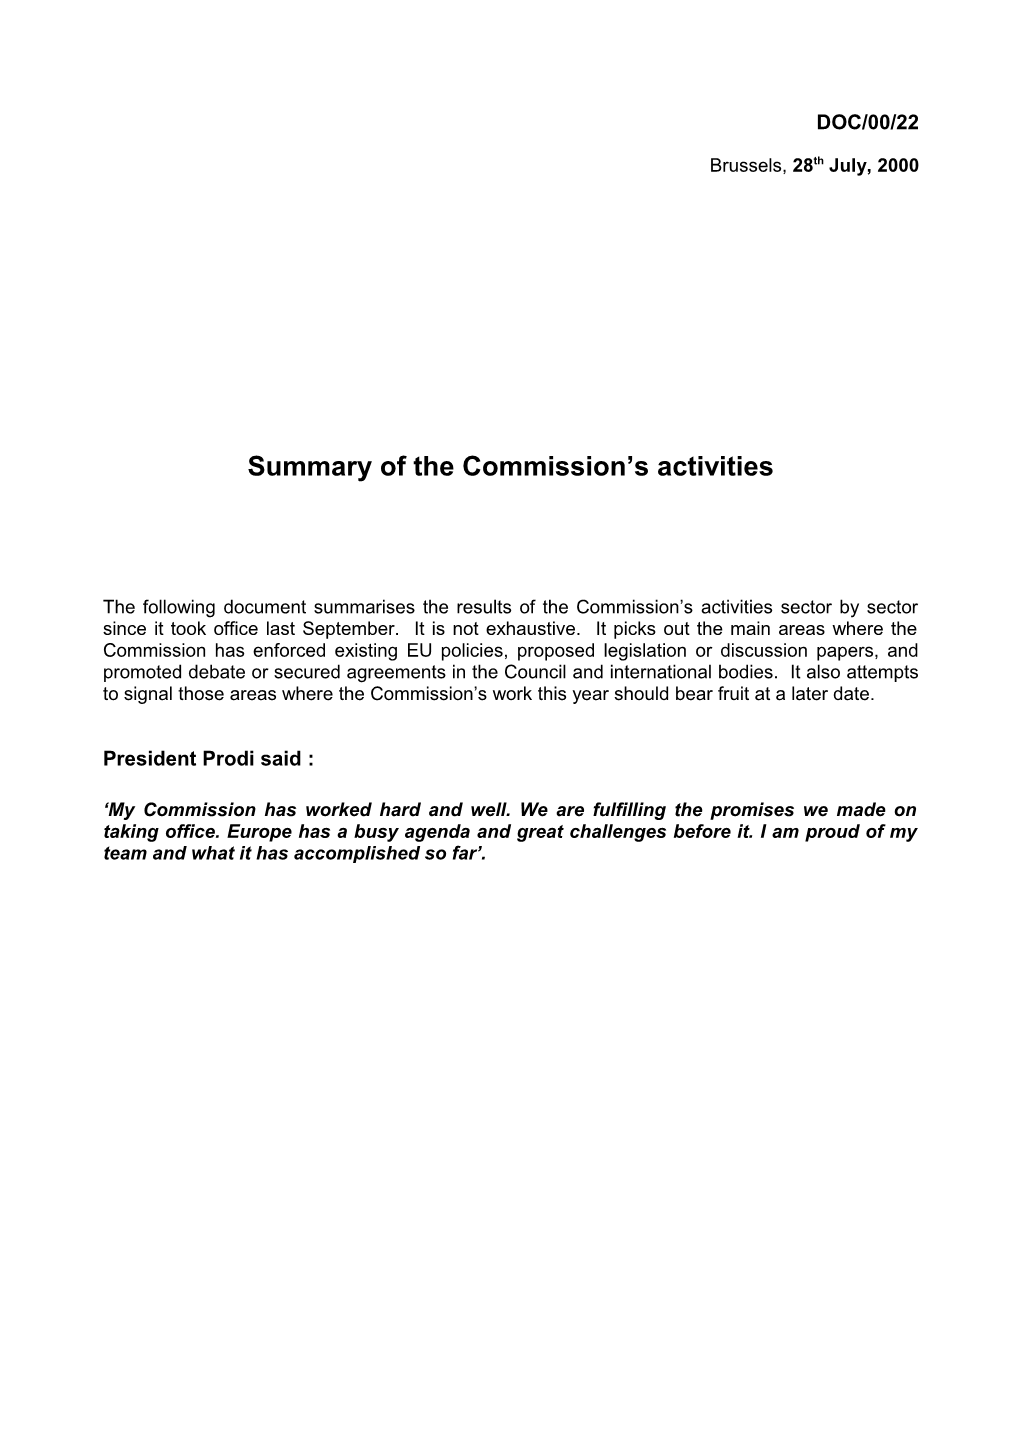 Summary of the Commission S Activities